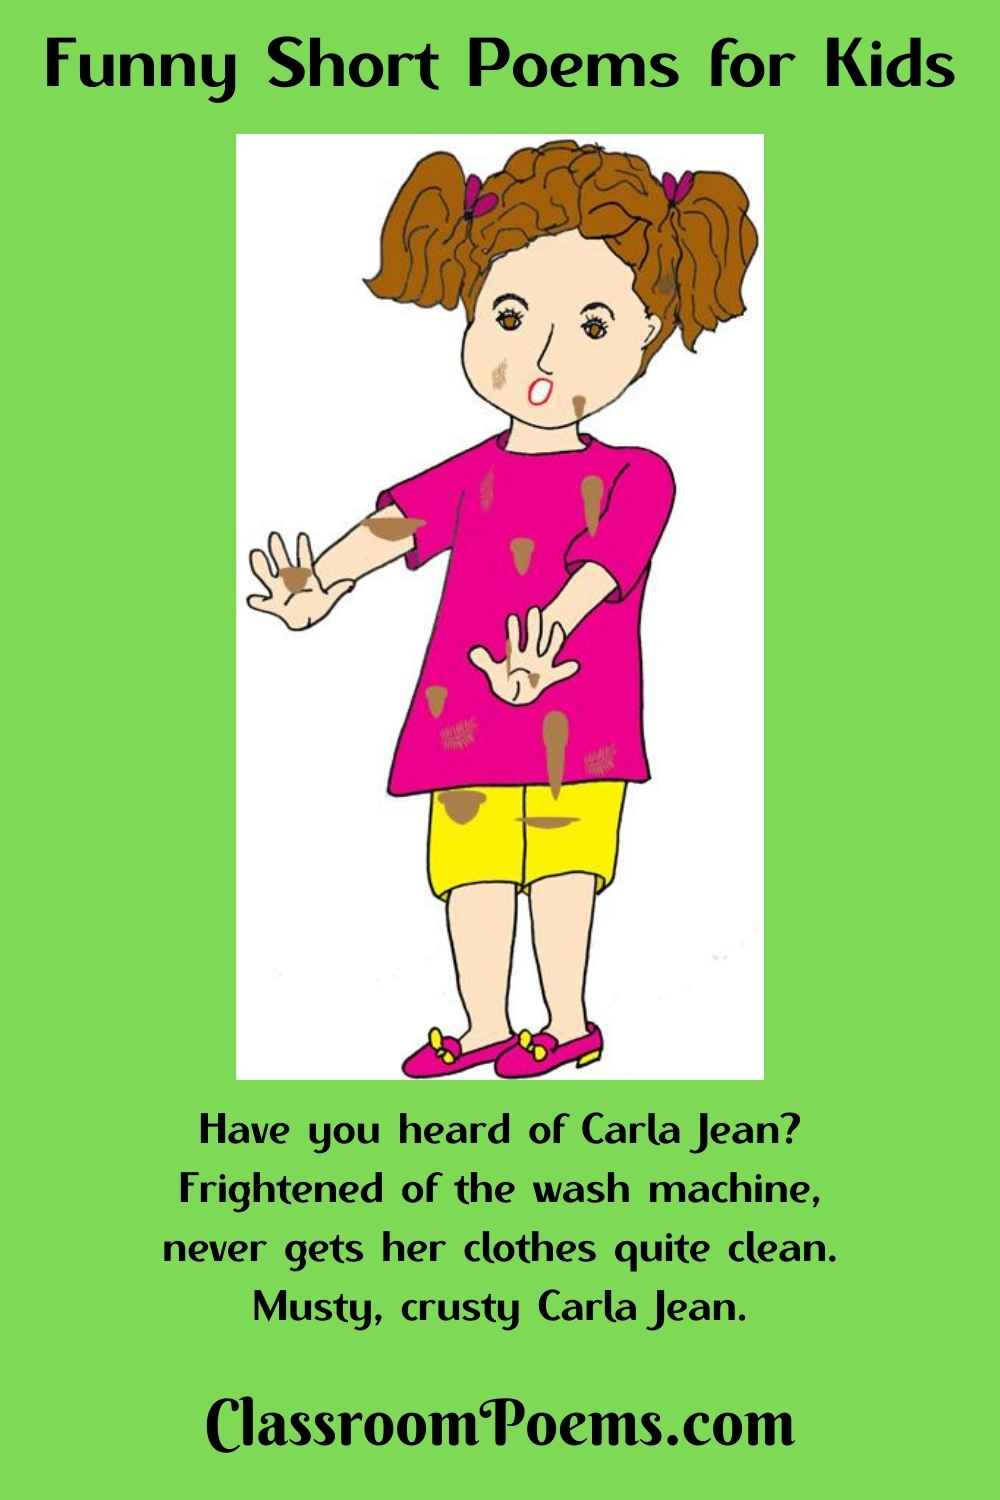 Dirty girl cartoon. CARLA JEAN, a funny short poem by Denise Rodgers on ClassroomPoems.com.